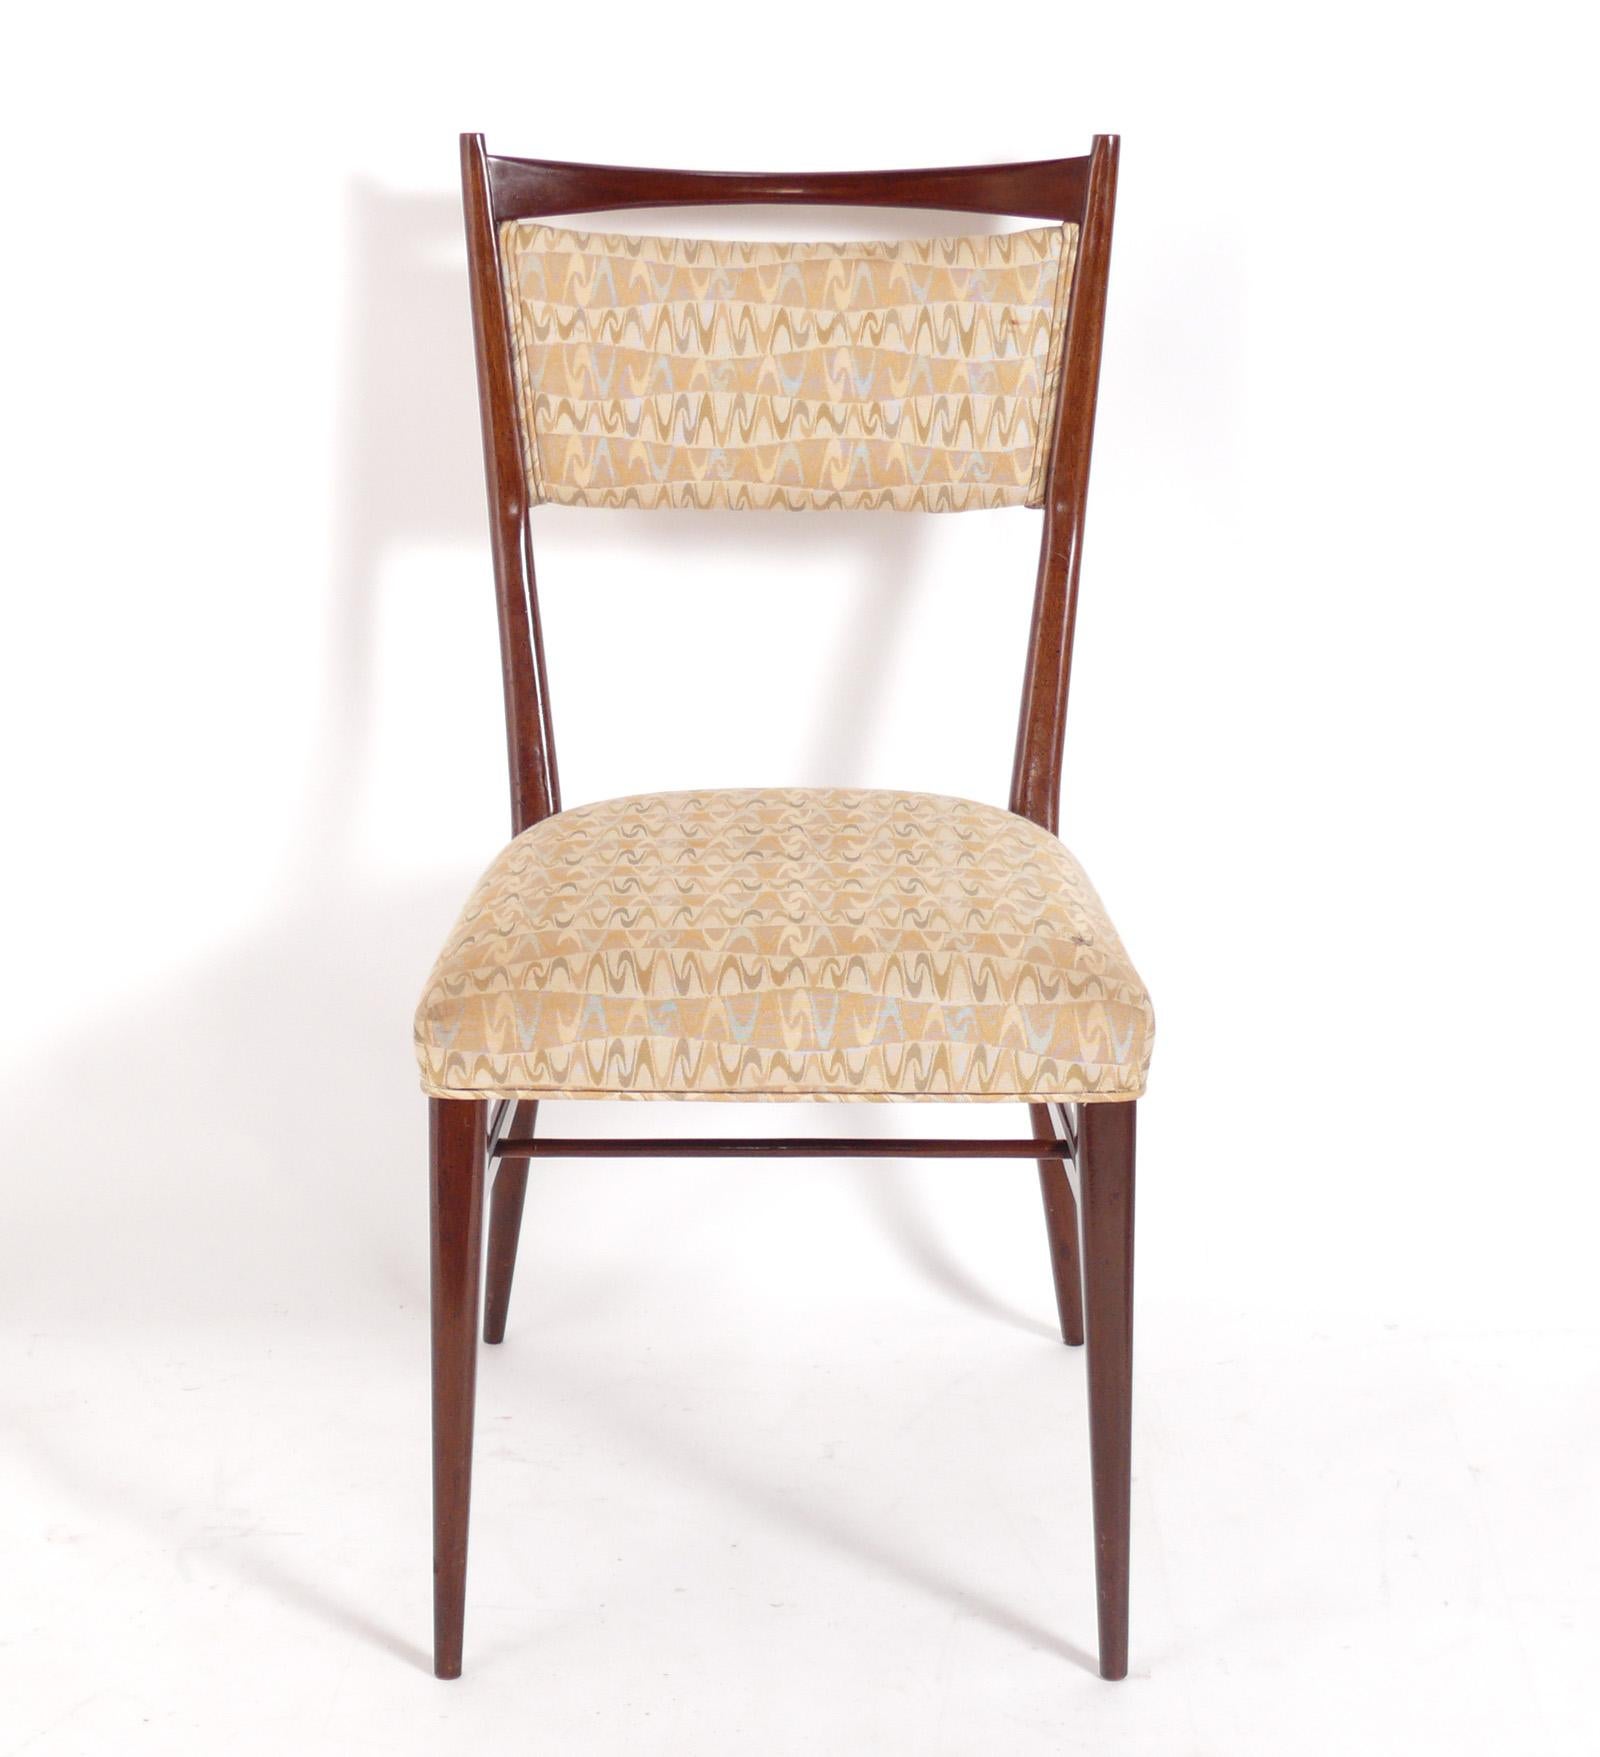 Set of Six Mid Century Dining Chairs, designed by Paul McCobb for Calvin Furniture's Directional Line, American, circa 1950s. These chairs are currently being refinished and reupholstered and can be completed in your choice of wood finish color and